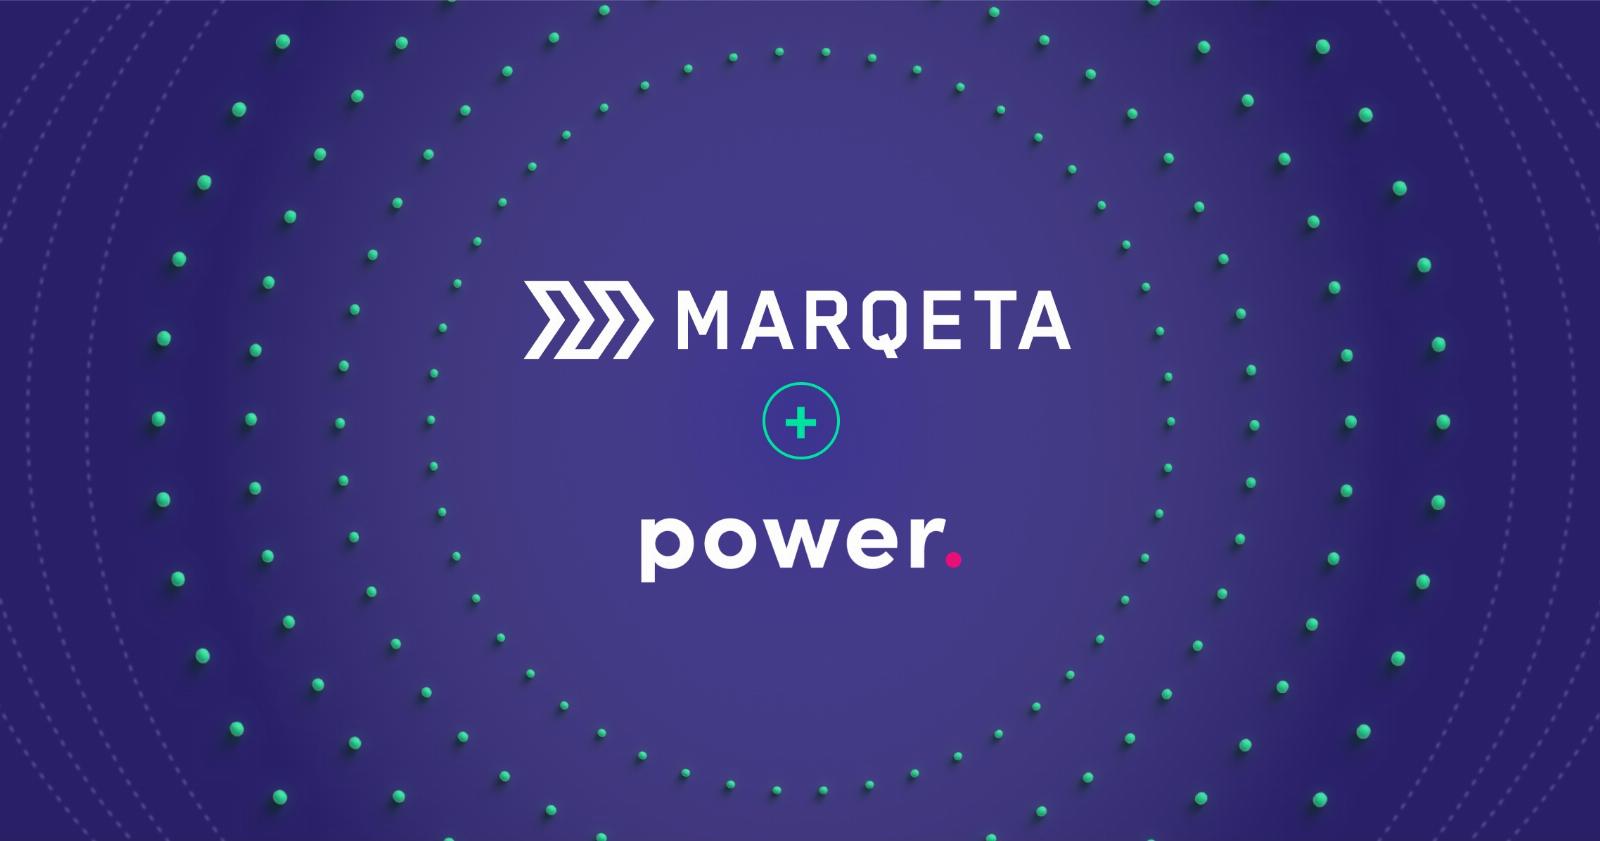 Marqeta buys fintech Power Finance in $275M all-cash deal, its first acquisition